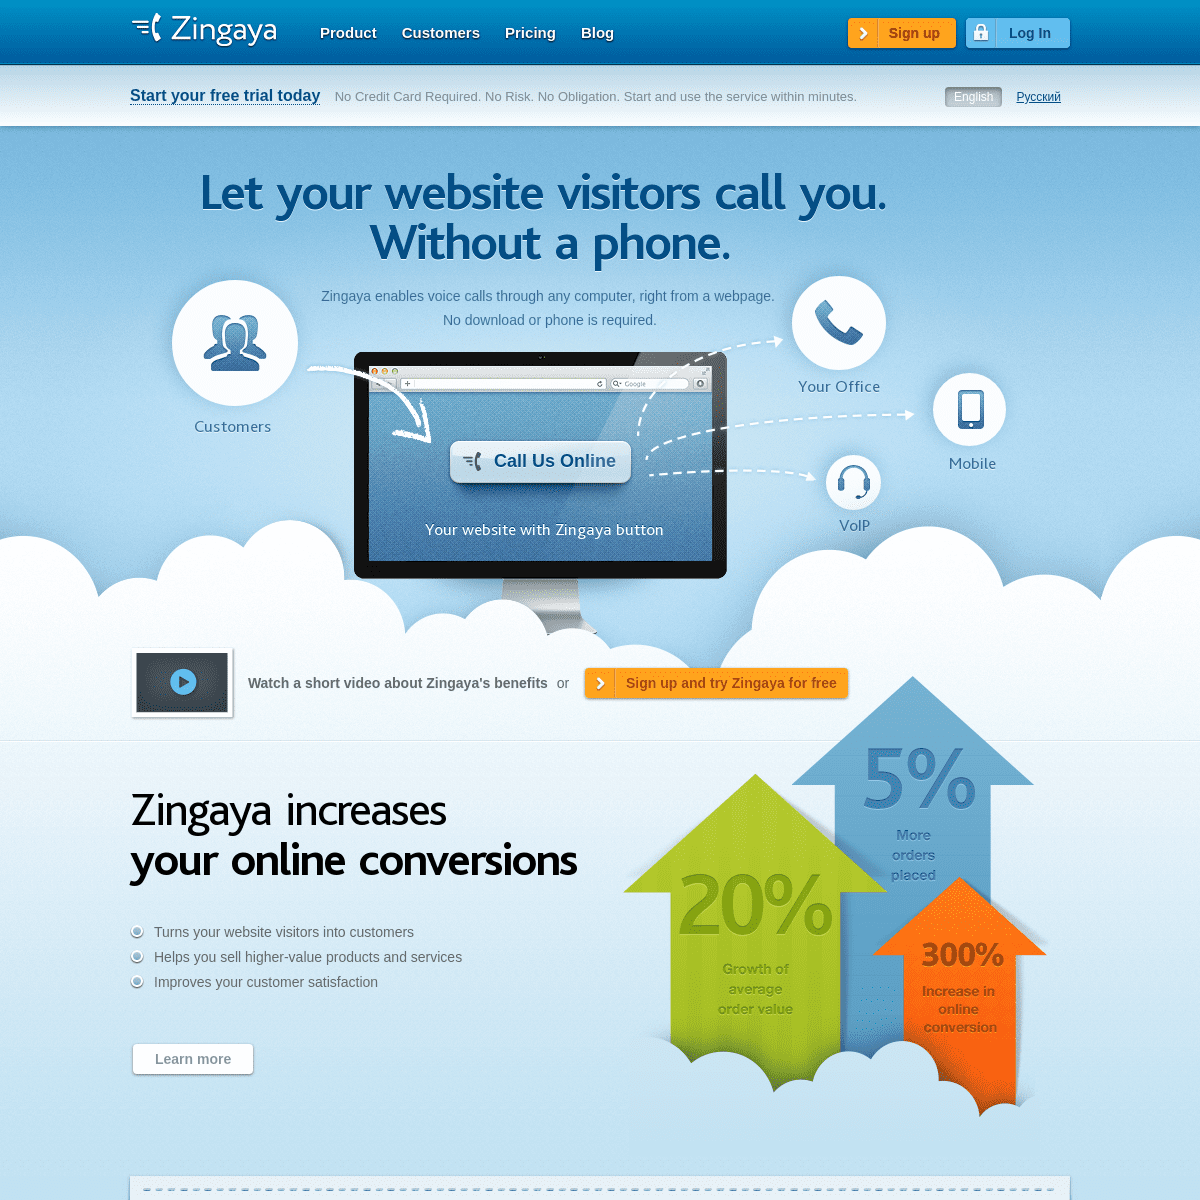 Online Call - Let your website visitors call you without a phone